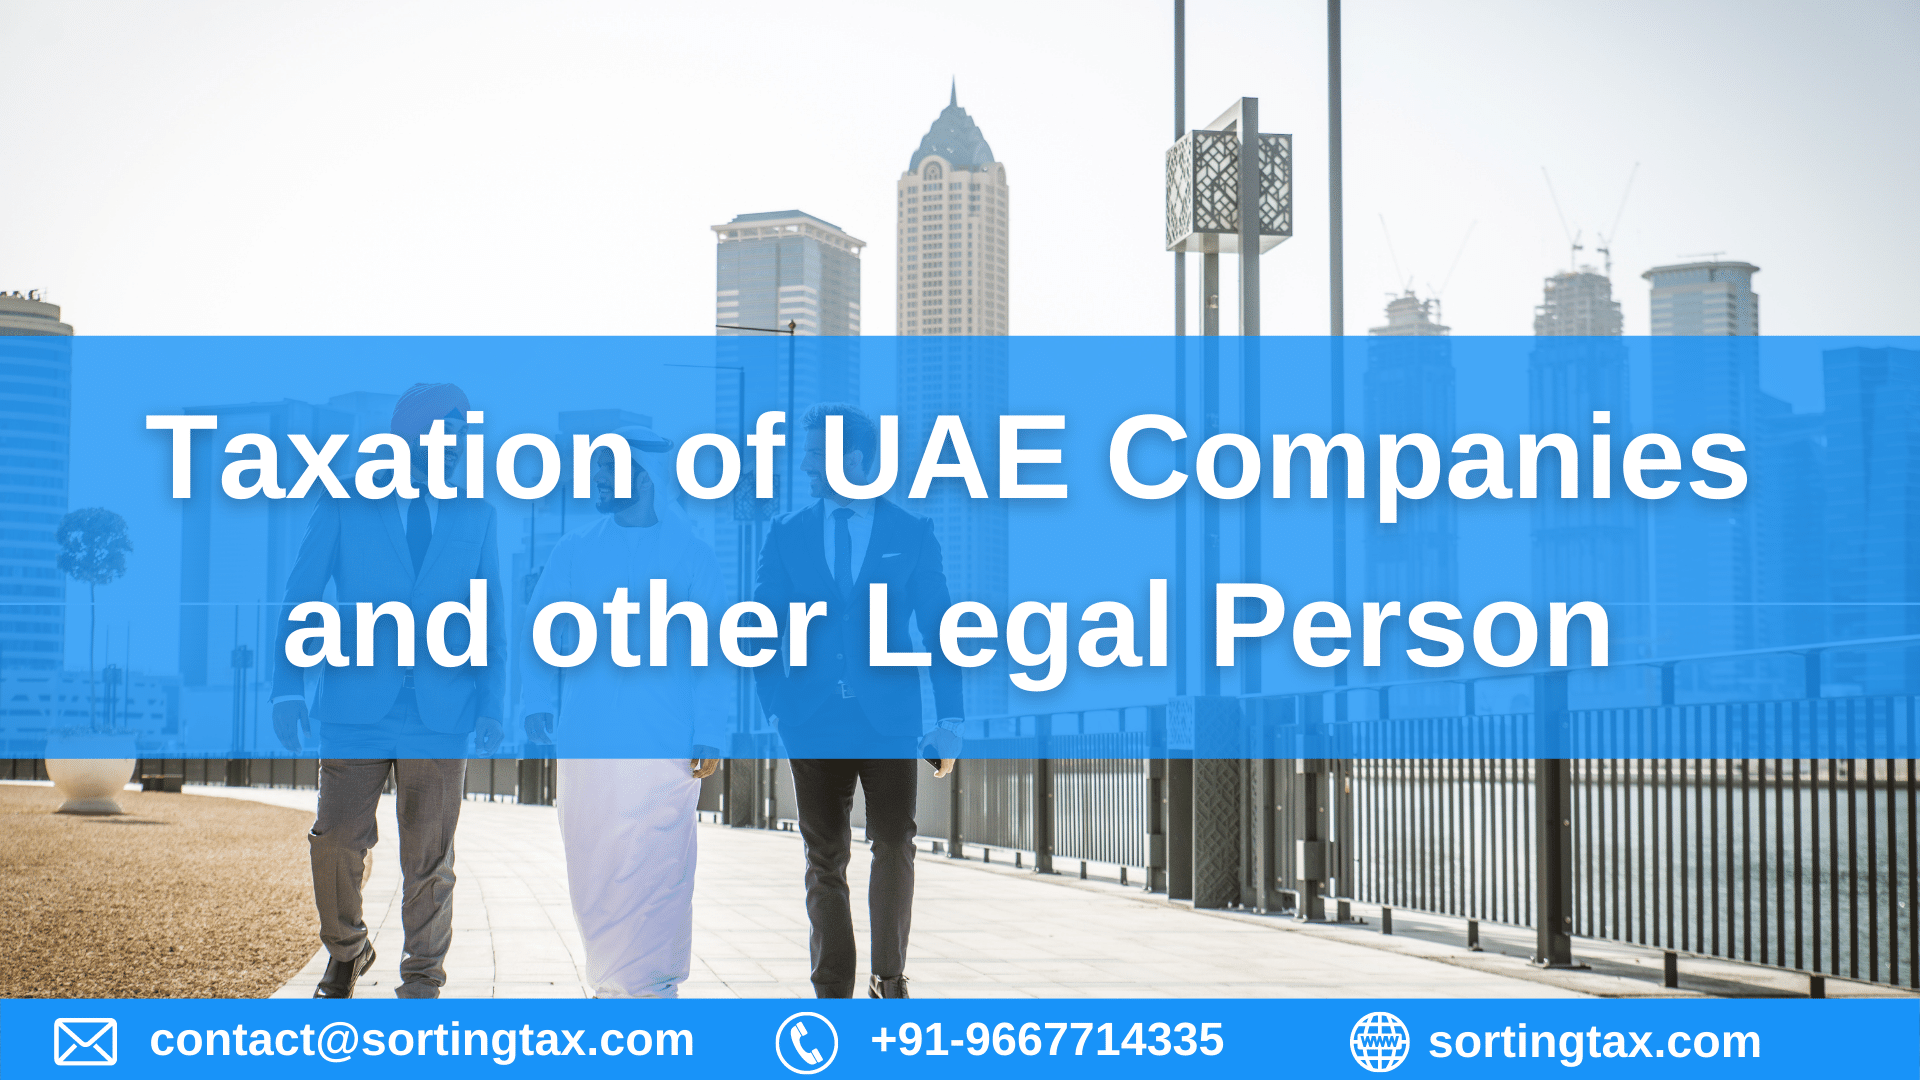 Taxation of UAE Companies and other Legal Person